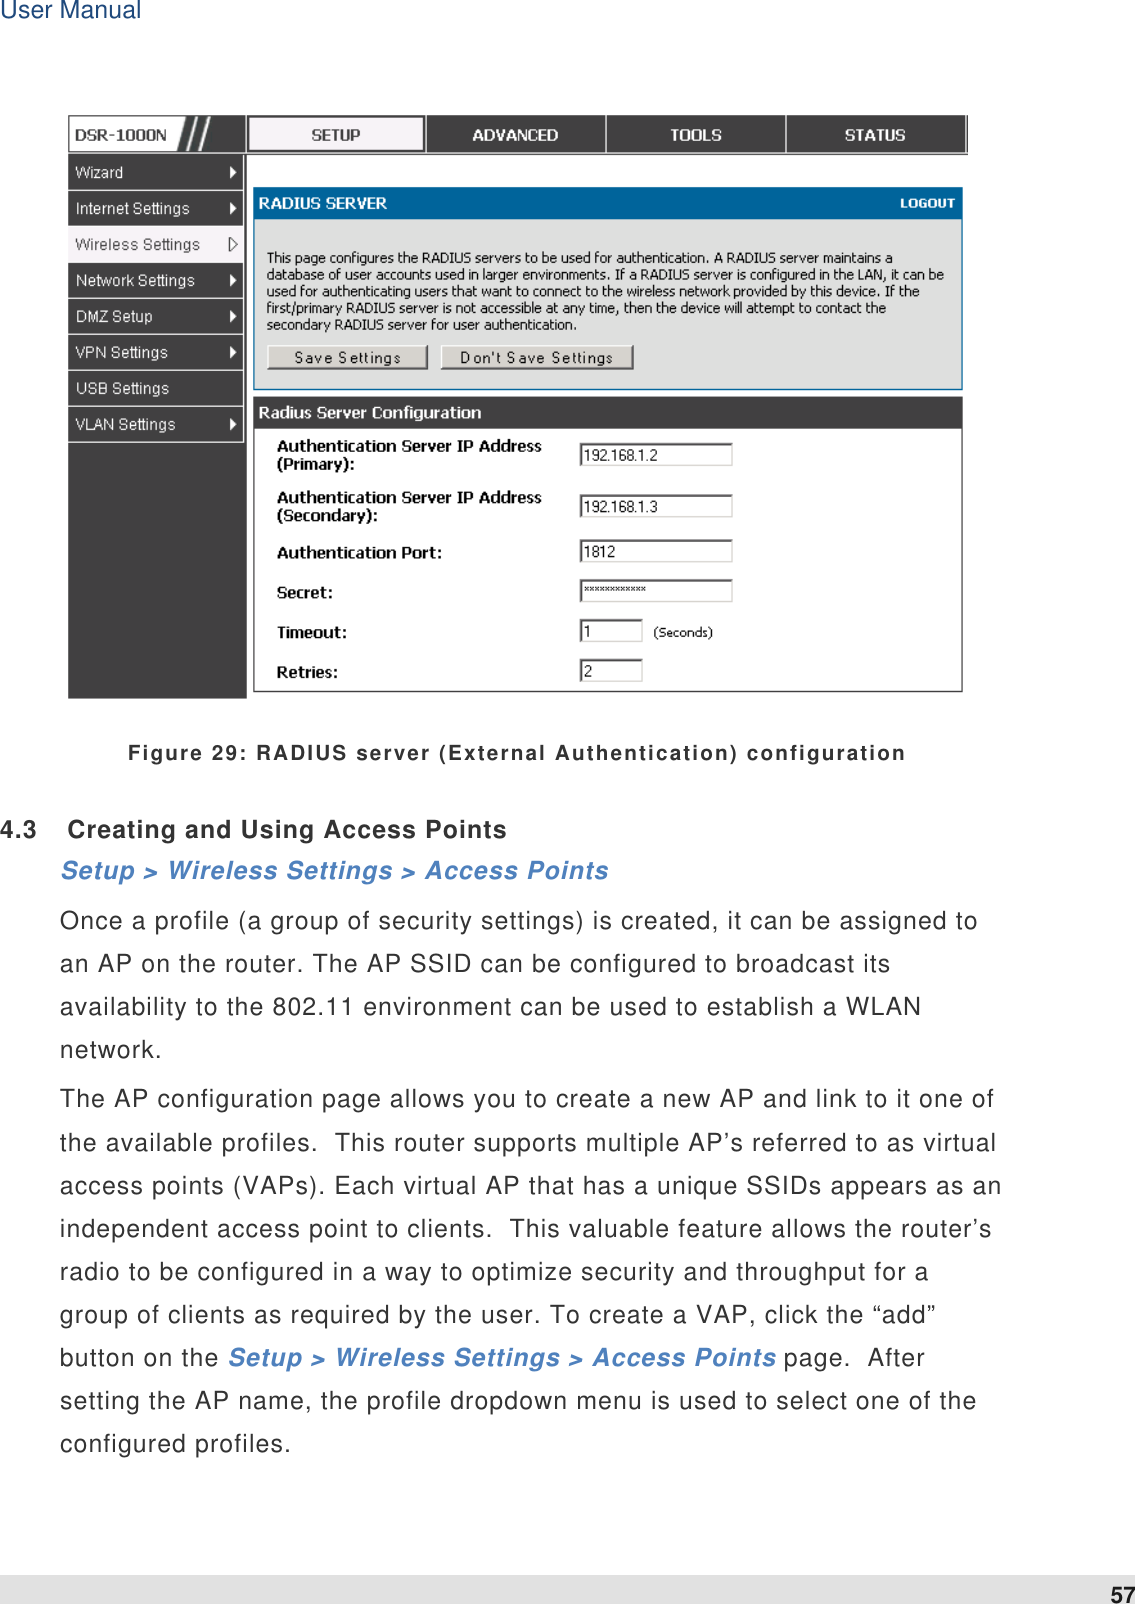 User Manual 57     Figure 29: RADIUS server (External Authentication) configuration 4.3  Creating and Using Access Points Setup &gt; Wireless Settings &gt; Access Points  Once a profile (a group of security settings) is created, it can be assigned to an AP on the router. The AP SSID can be configured to broadcast its availability to the 802.11 environment can be used to establish a WLAN network.  The AP configuration page allows you to create a new AP and link to it one of the available profiles.  This router supports multiple AP’s referred to as virtual access points (VAPs). Each virtual AP that has a unique SSIDs appears as an independent access point to clients.  This valuable feature allows the router’s radio to be configured in a way to optimize security and throughput for a group of clients as required by the user. To create a VAP, click the “add” button on the Setup &gt; Wireless Settings &gt; Access Points page.  After setting the AP name, the profile dropdown menu is used to select one of the configured profiles.   